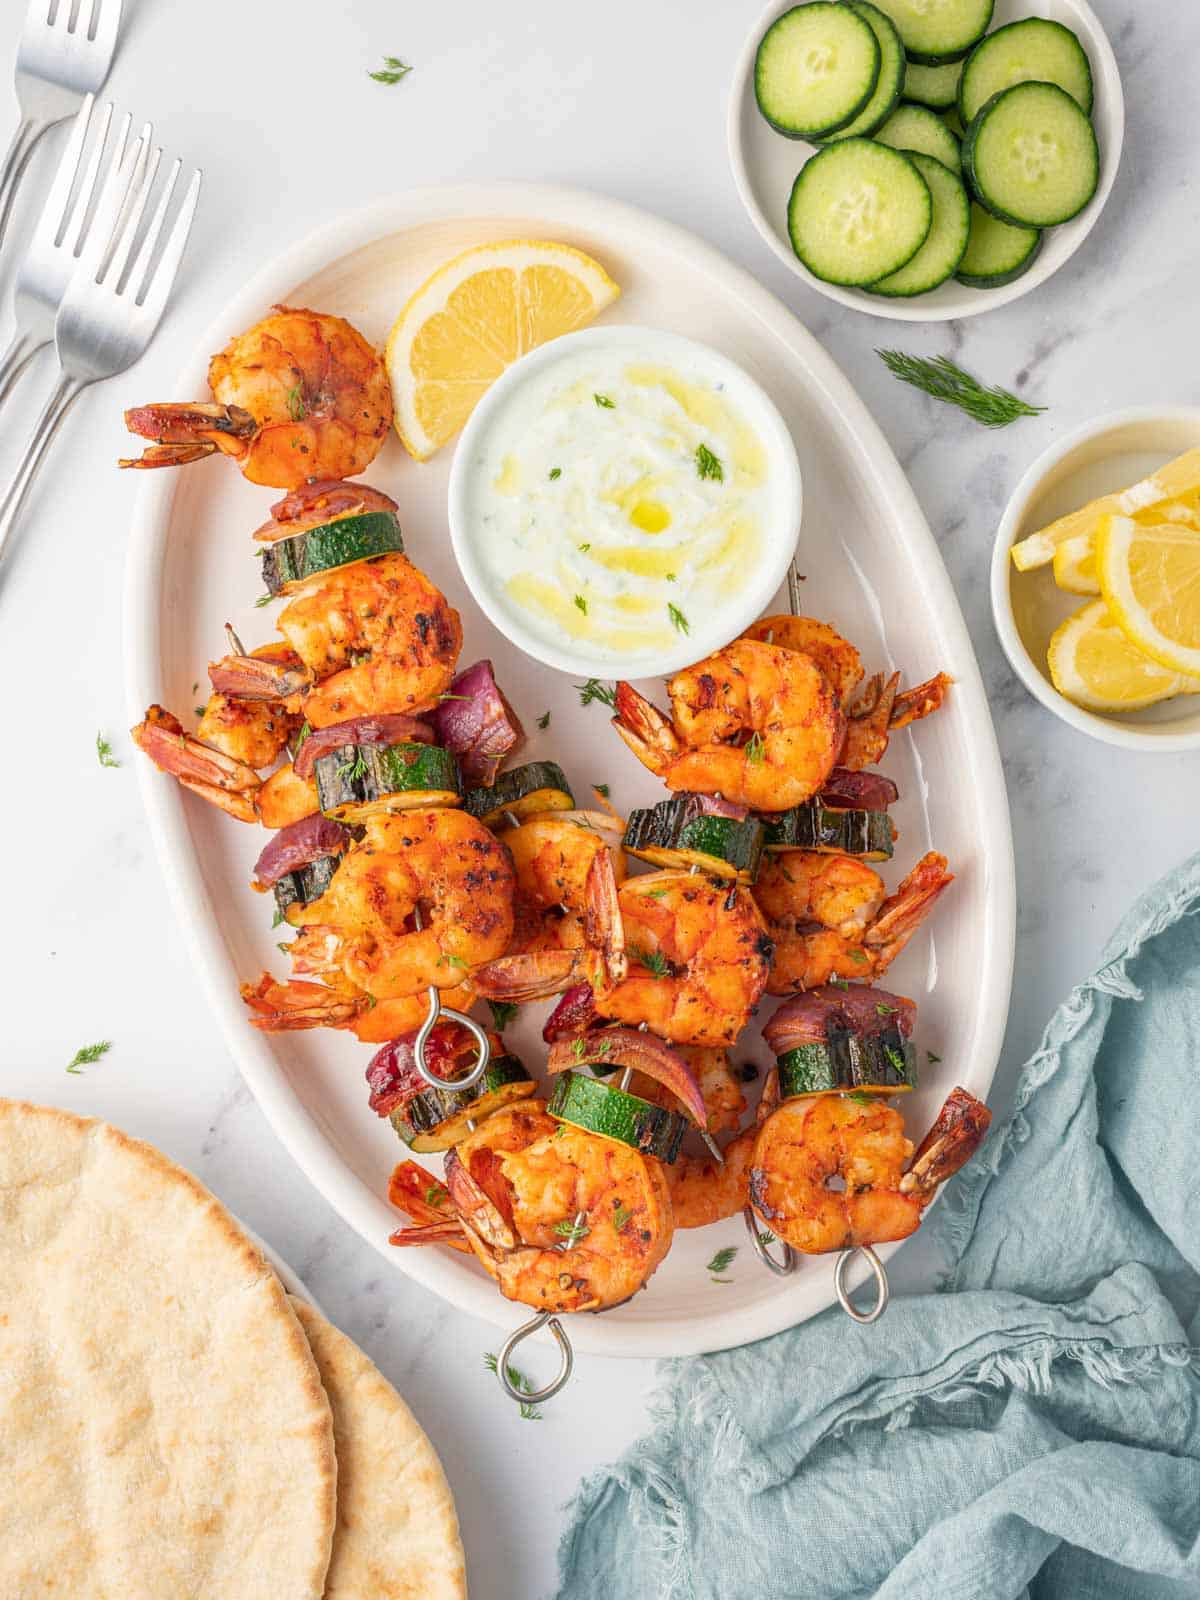 A platter of grilled shrimp with zucchini and onions.